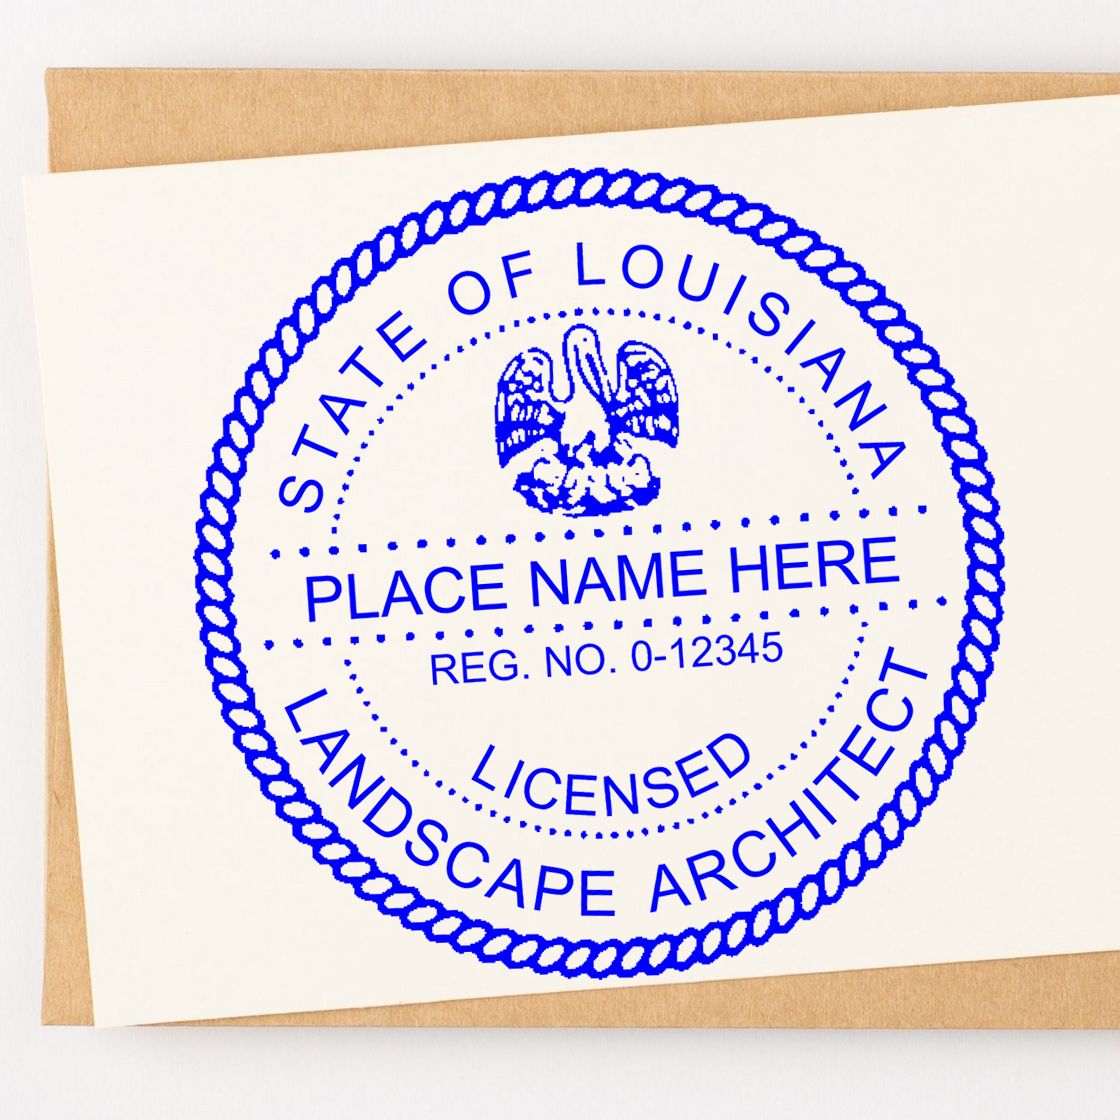 The Premium MaxLight Pre-Inked Louisiana Landscape Architectural Stamp stamp impression comes to life with a crisp, detailed photo on paper - showcasing true professional quality.